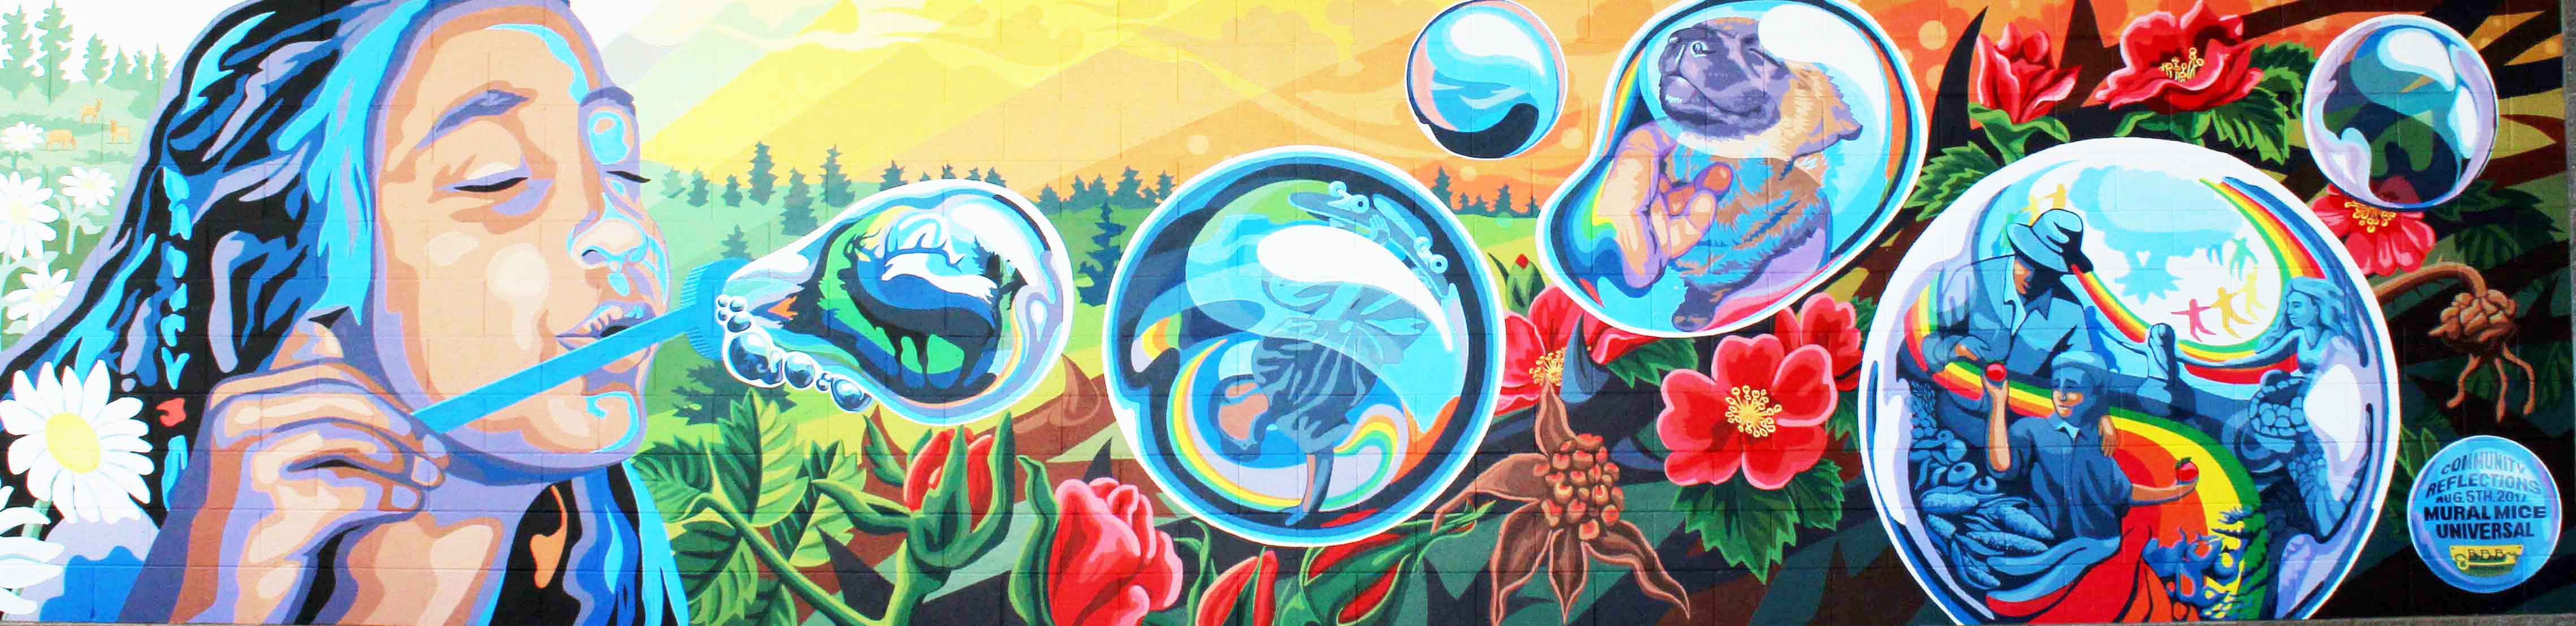 Community Reflections Mural